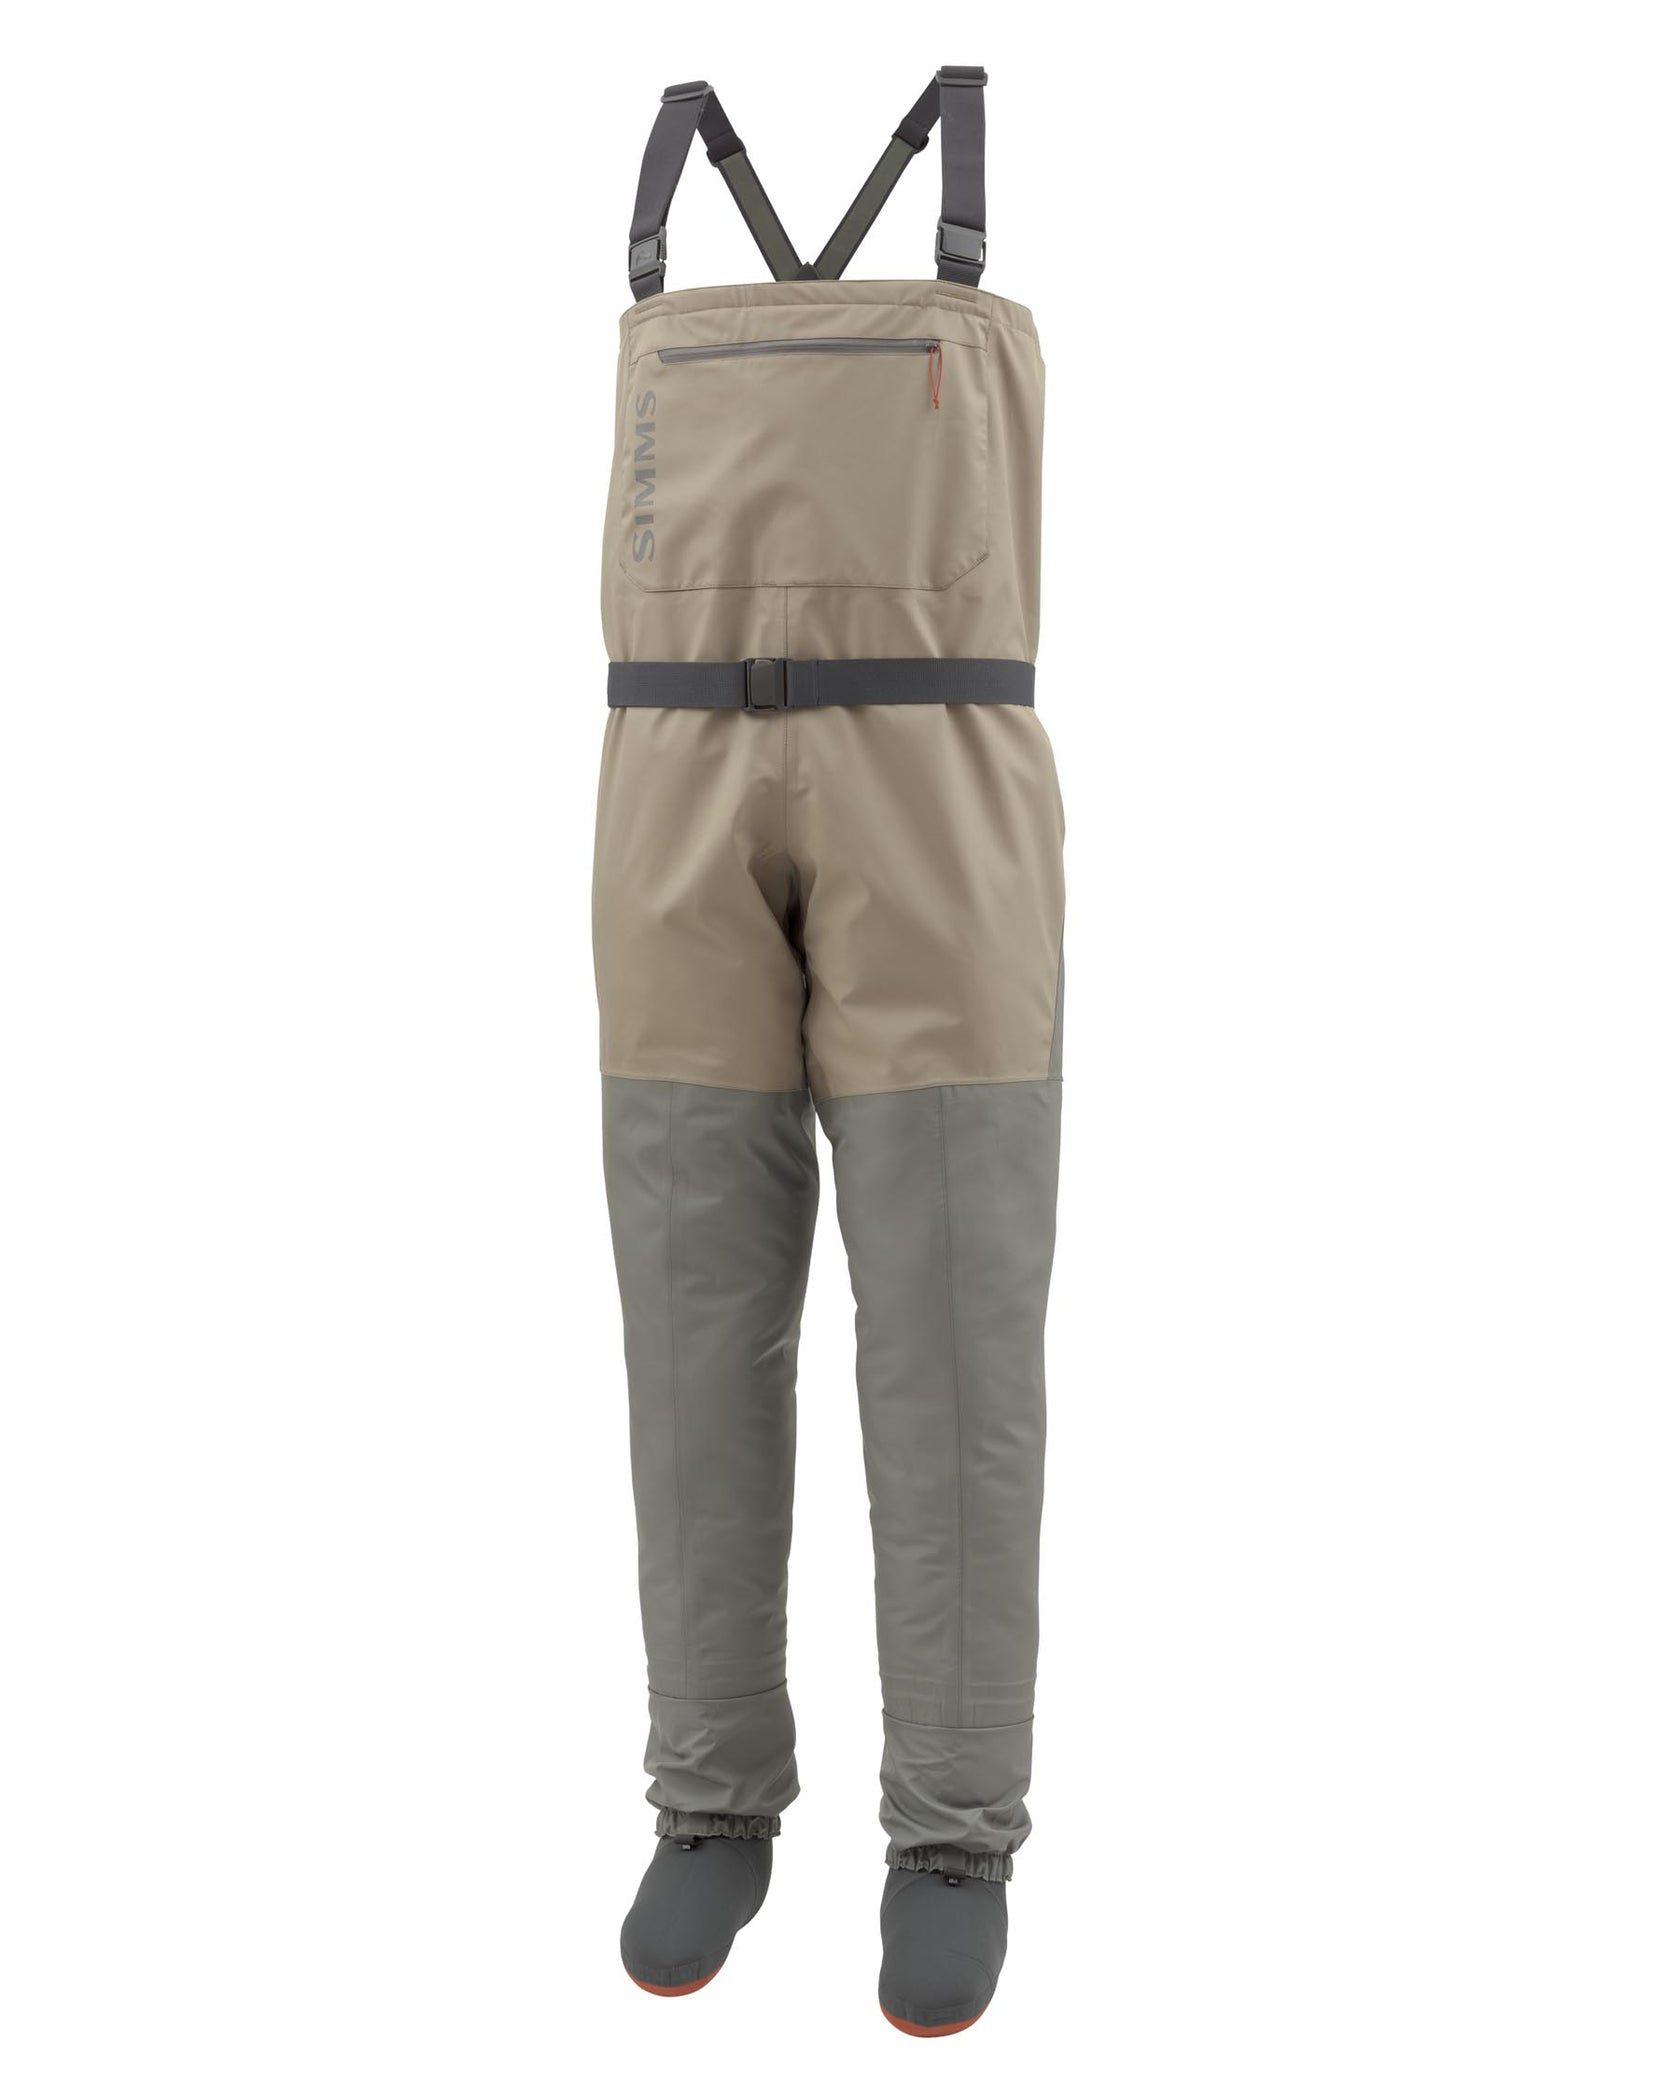 Simms M's Tributary Stockingfoot Wader - Large (9-11)